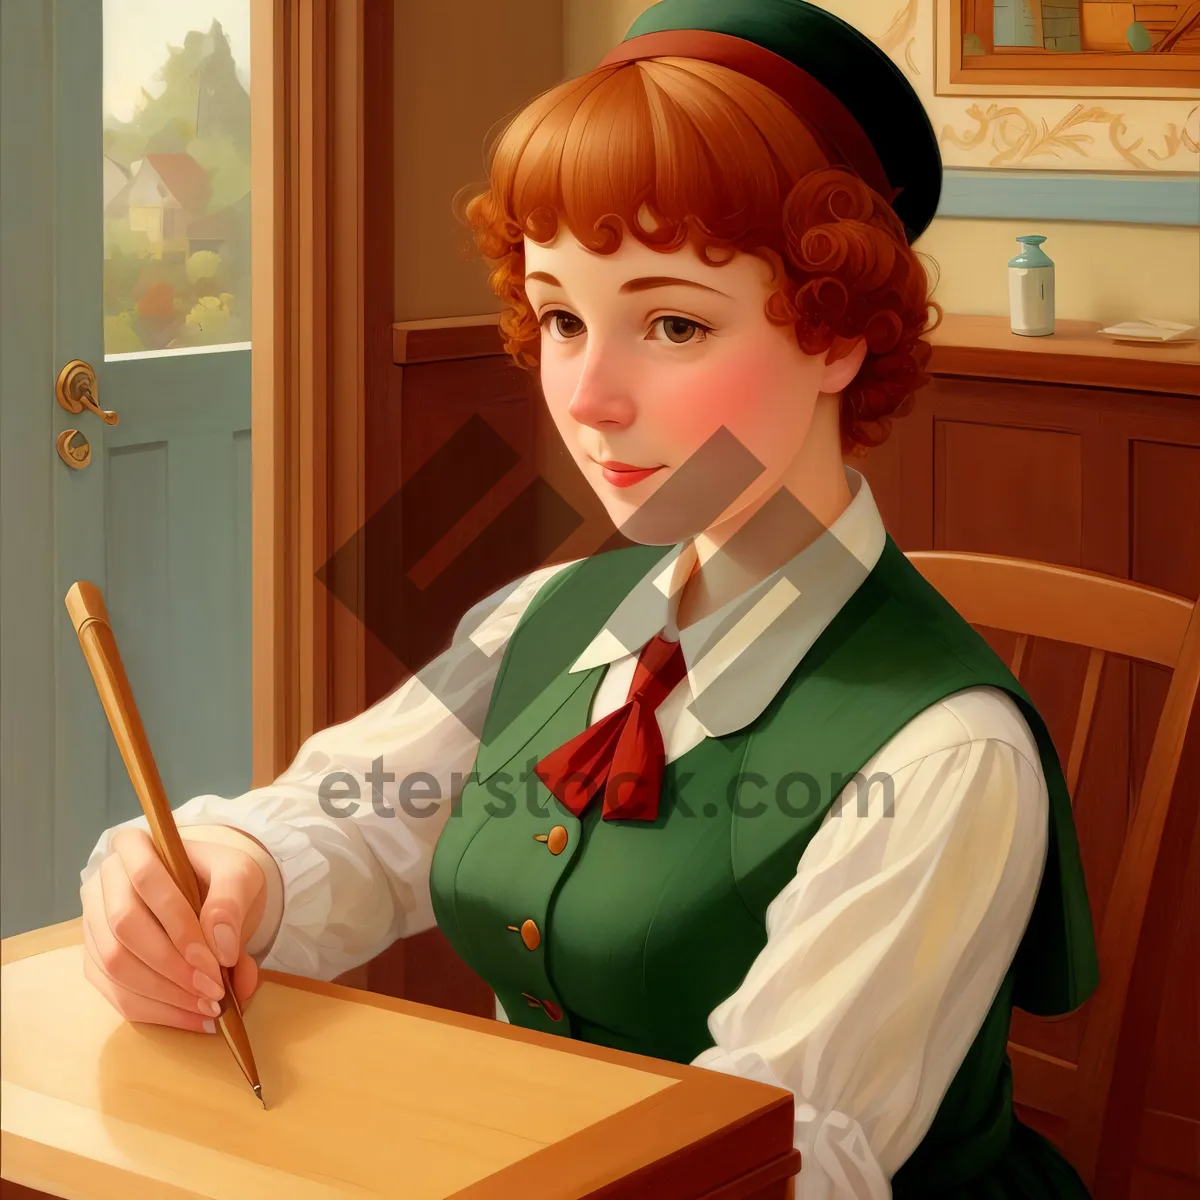 Picture of Cheerful student with wooden spoon and pen, smiling